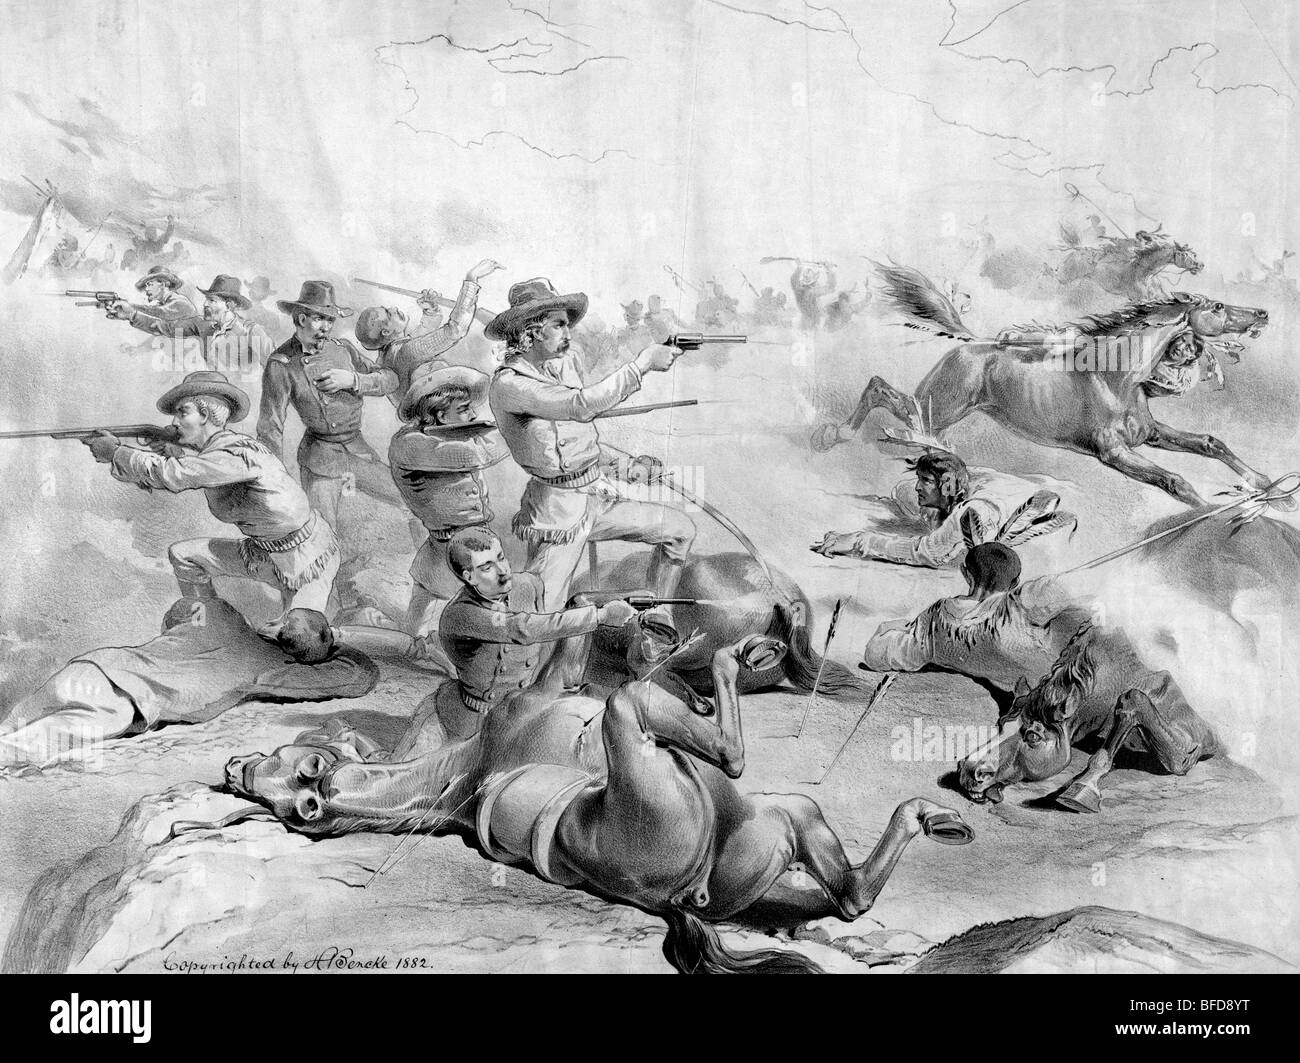 Print depicting Custer's Last Stand with the US 7th Cavalry at the Battle of the Little Bighorn in 1876. Stock Photo